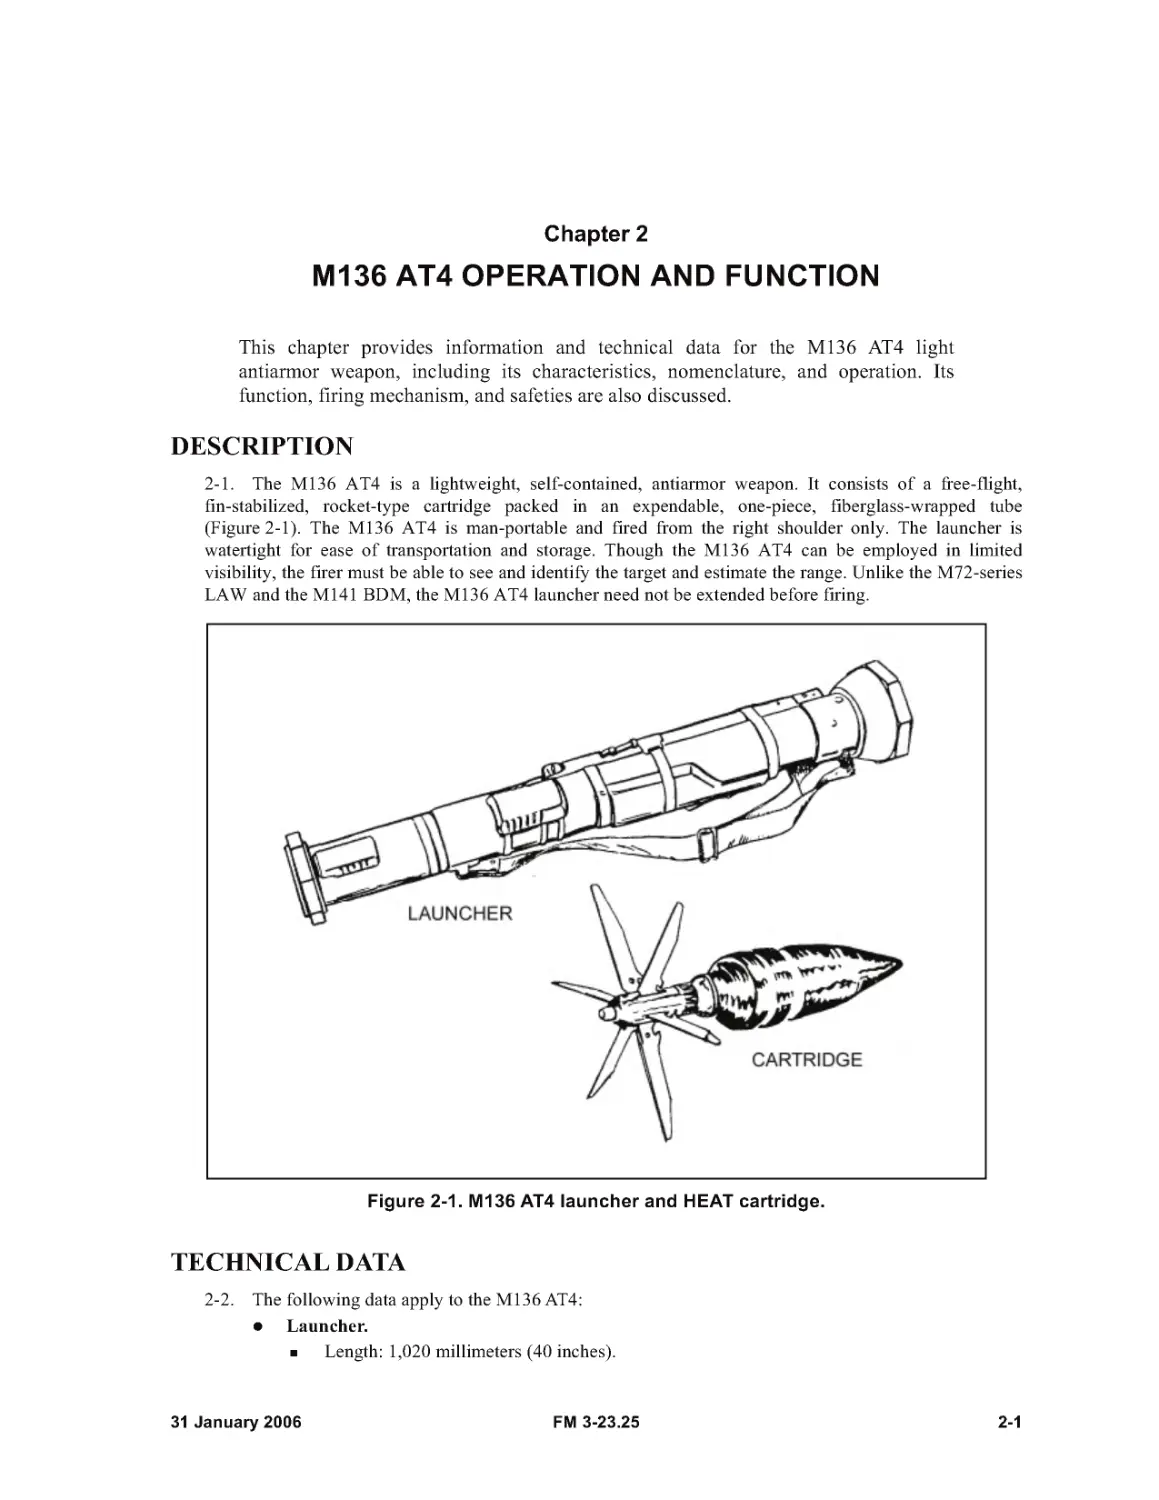 Figure 2-1. M136 AT4 launcher and HEAT cartridge.
Chapter 2 - M136 AT4 OPERATION AND FUNCTION
TECHNICAL DATA